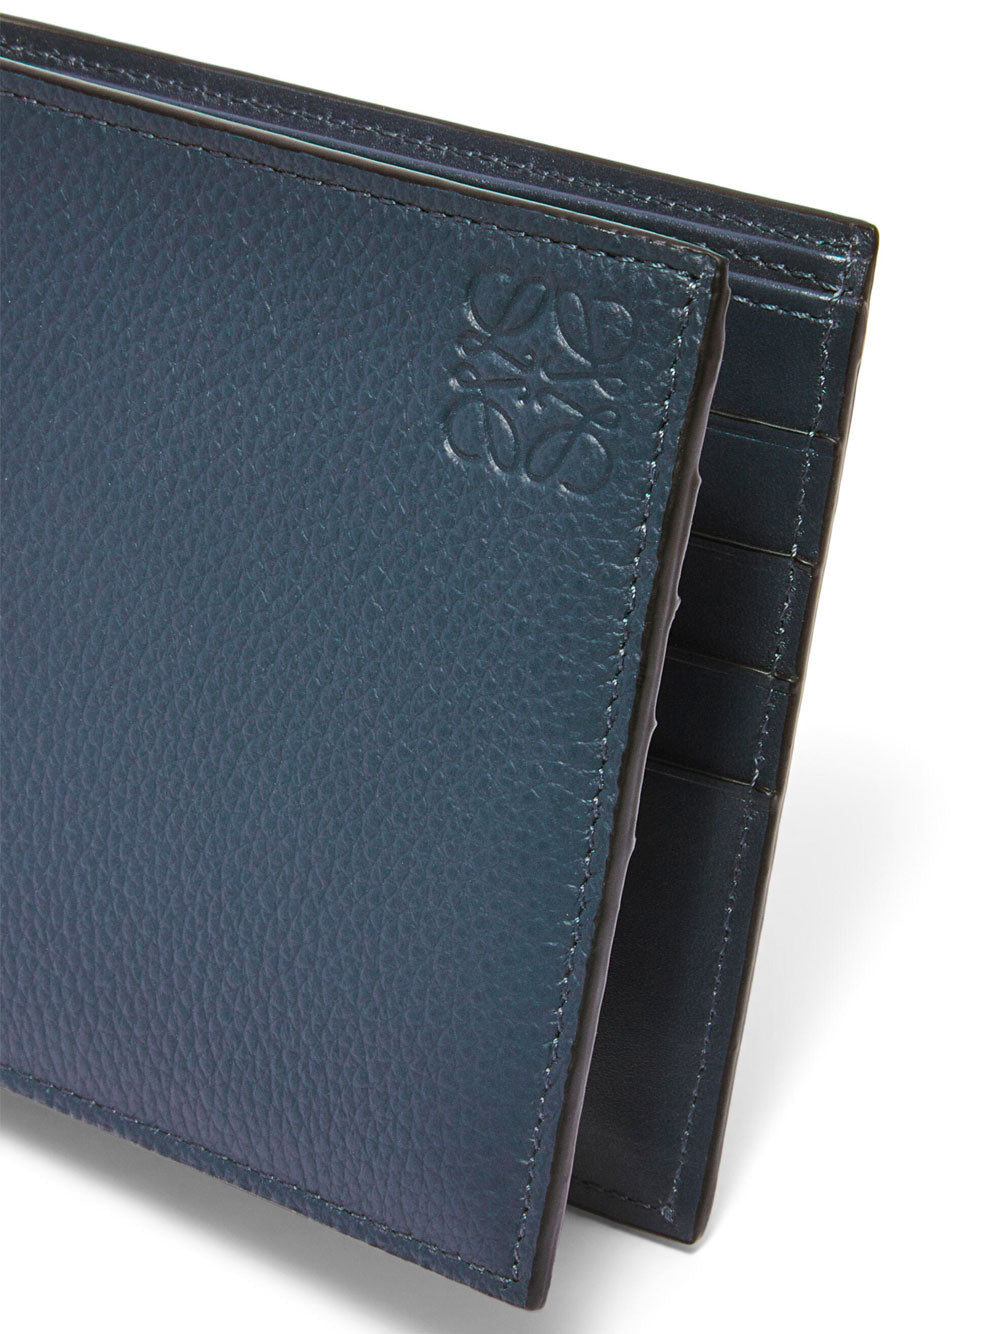 Bifold grained leather wallet